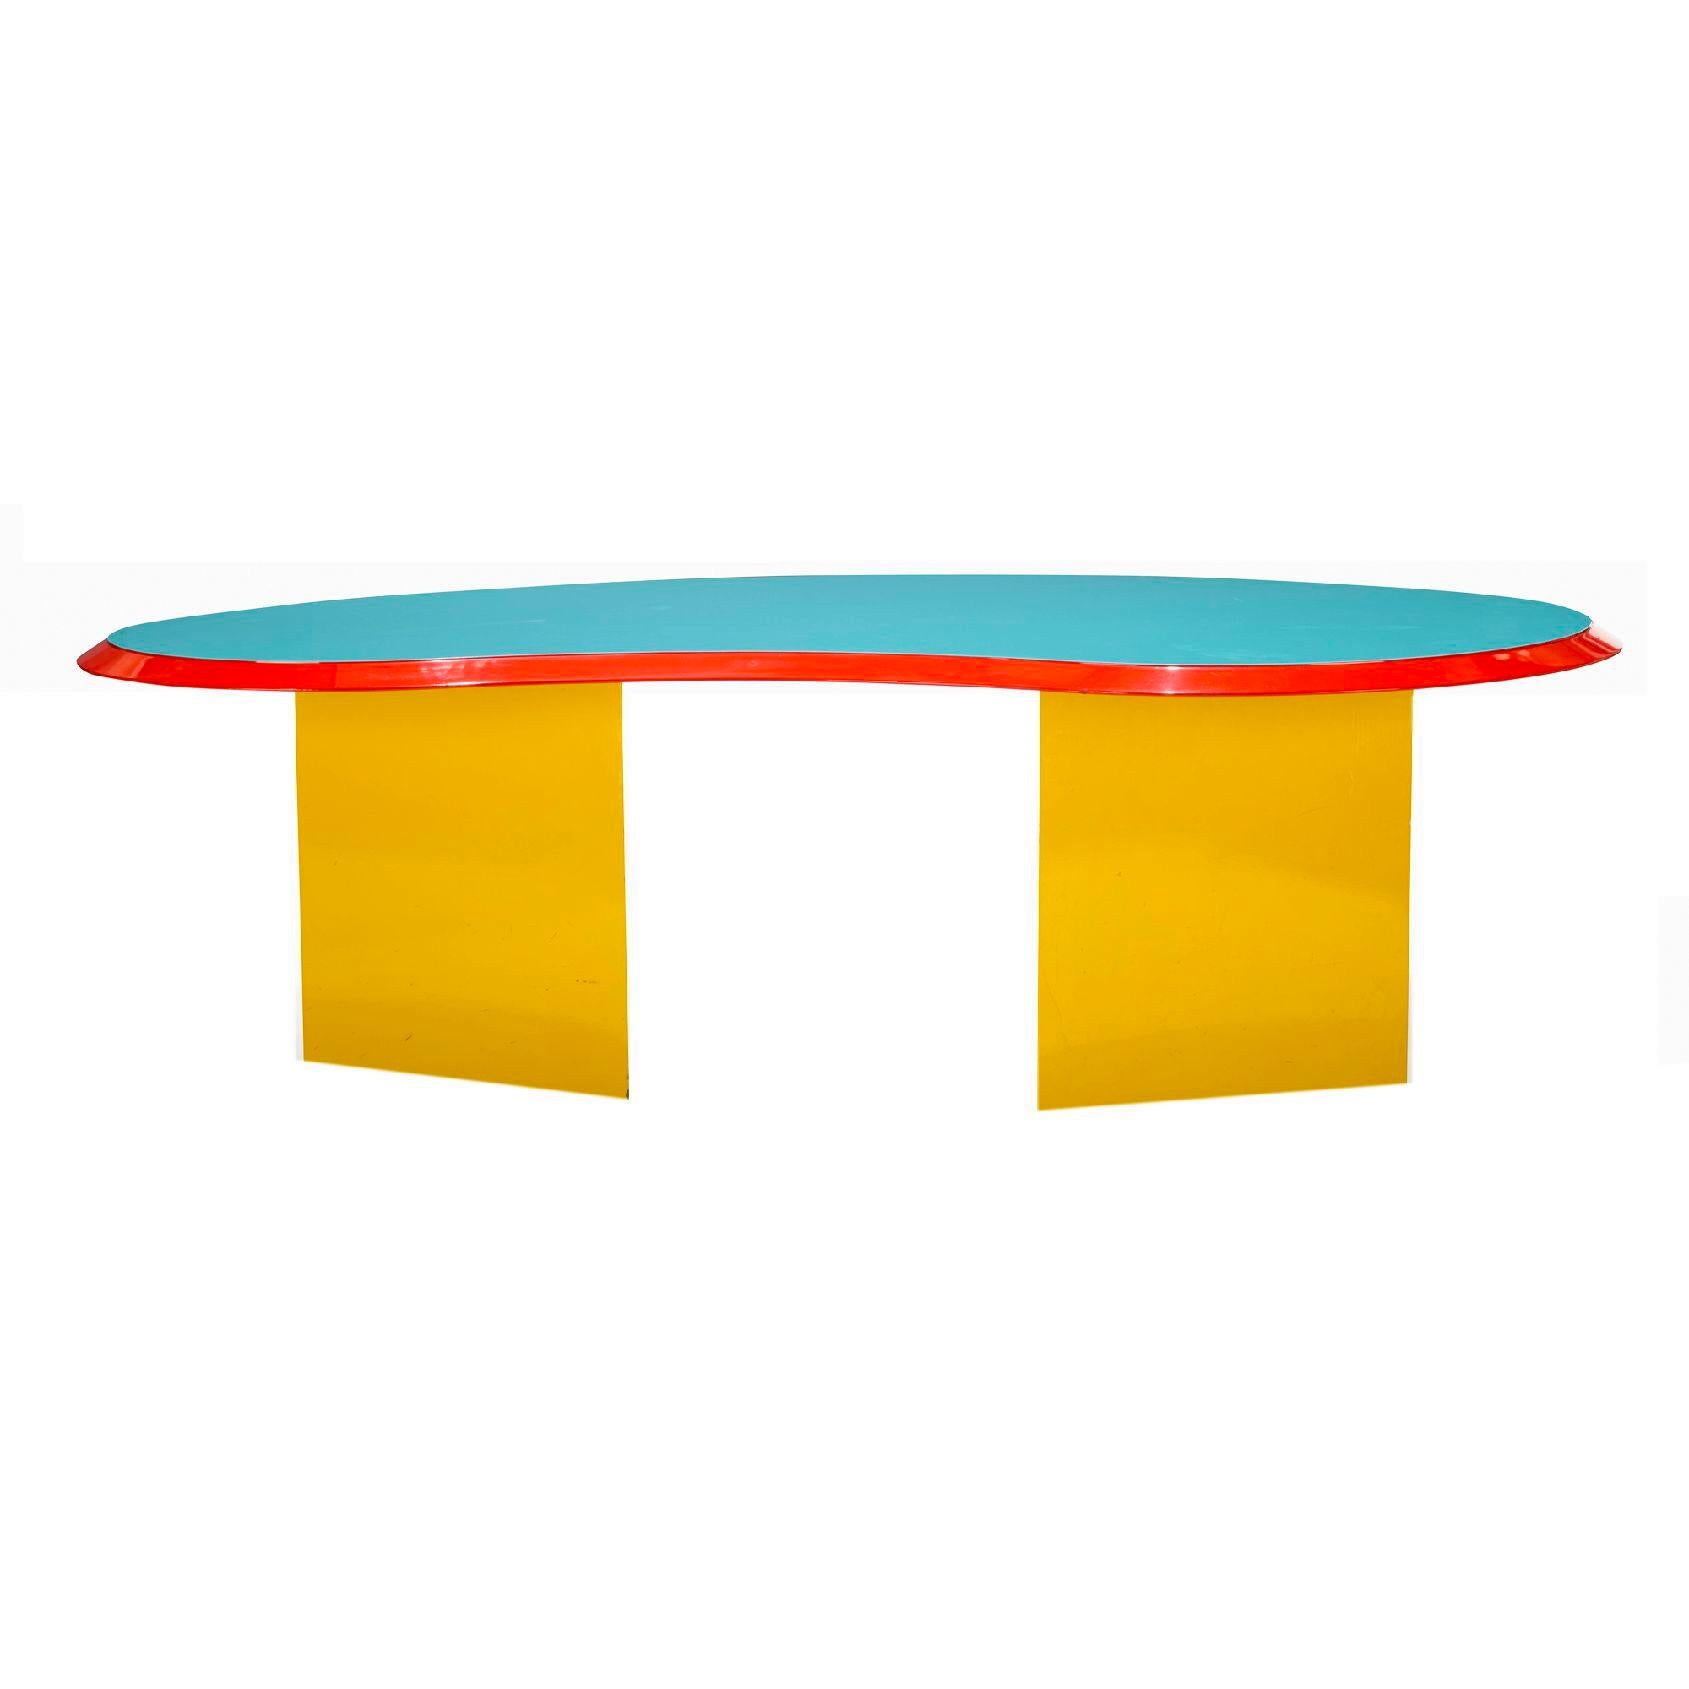 Madonna Table by Arquitectonica Miami for Memphis Milano, 1984. Iconic an extremely rare postmodern piece and one of the only Memphis Group productions whose design was commissioned from an outside firm. The table that is shown in images 1-4 is the